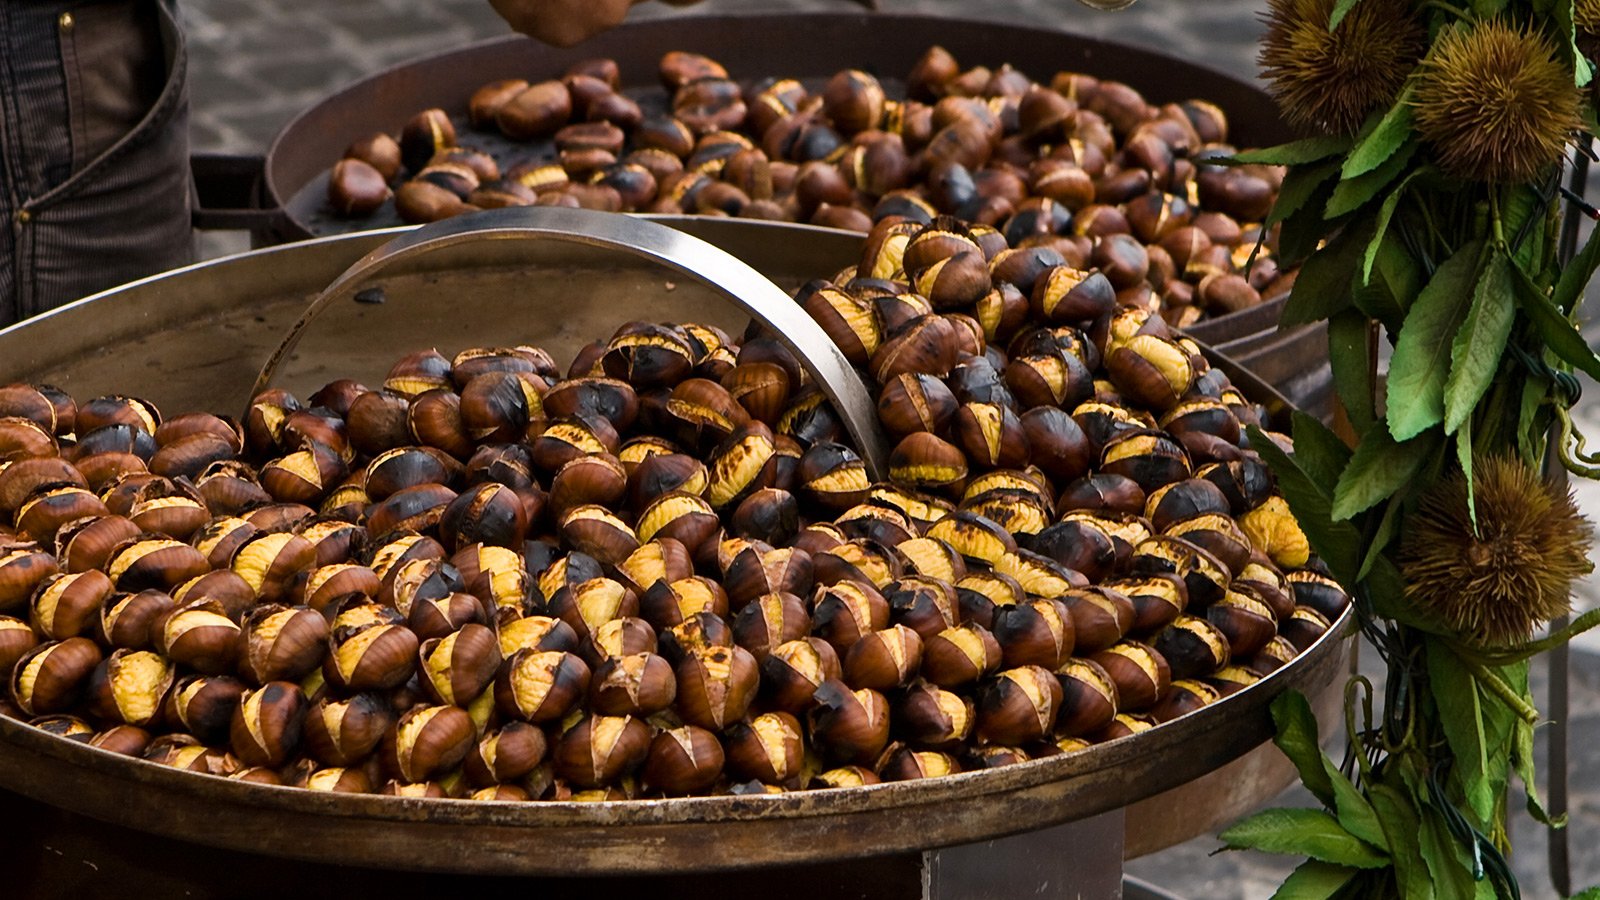 How to try roasted chestnuts in Rome